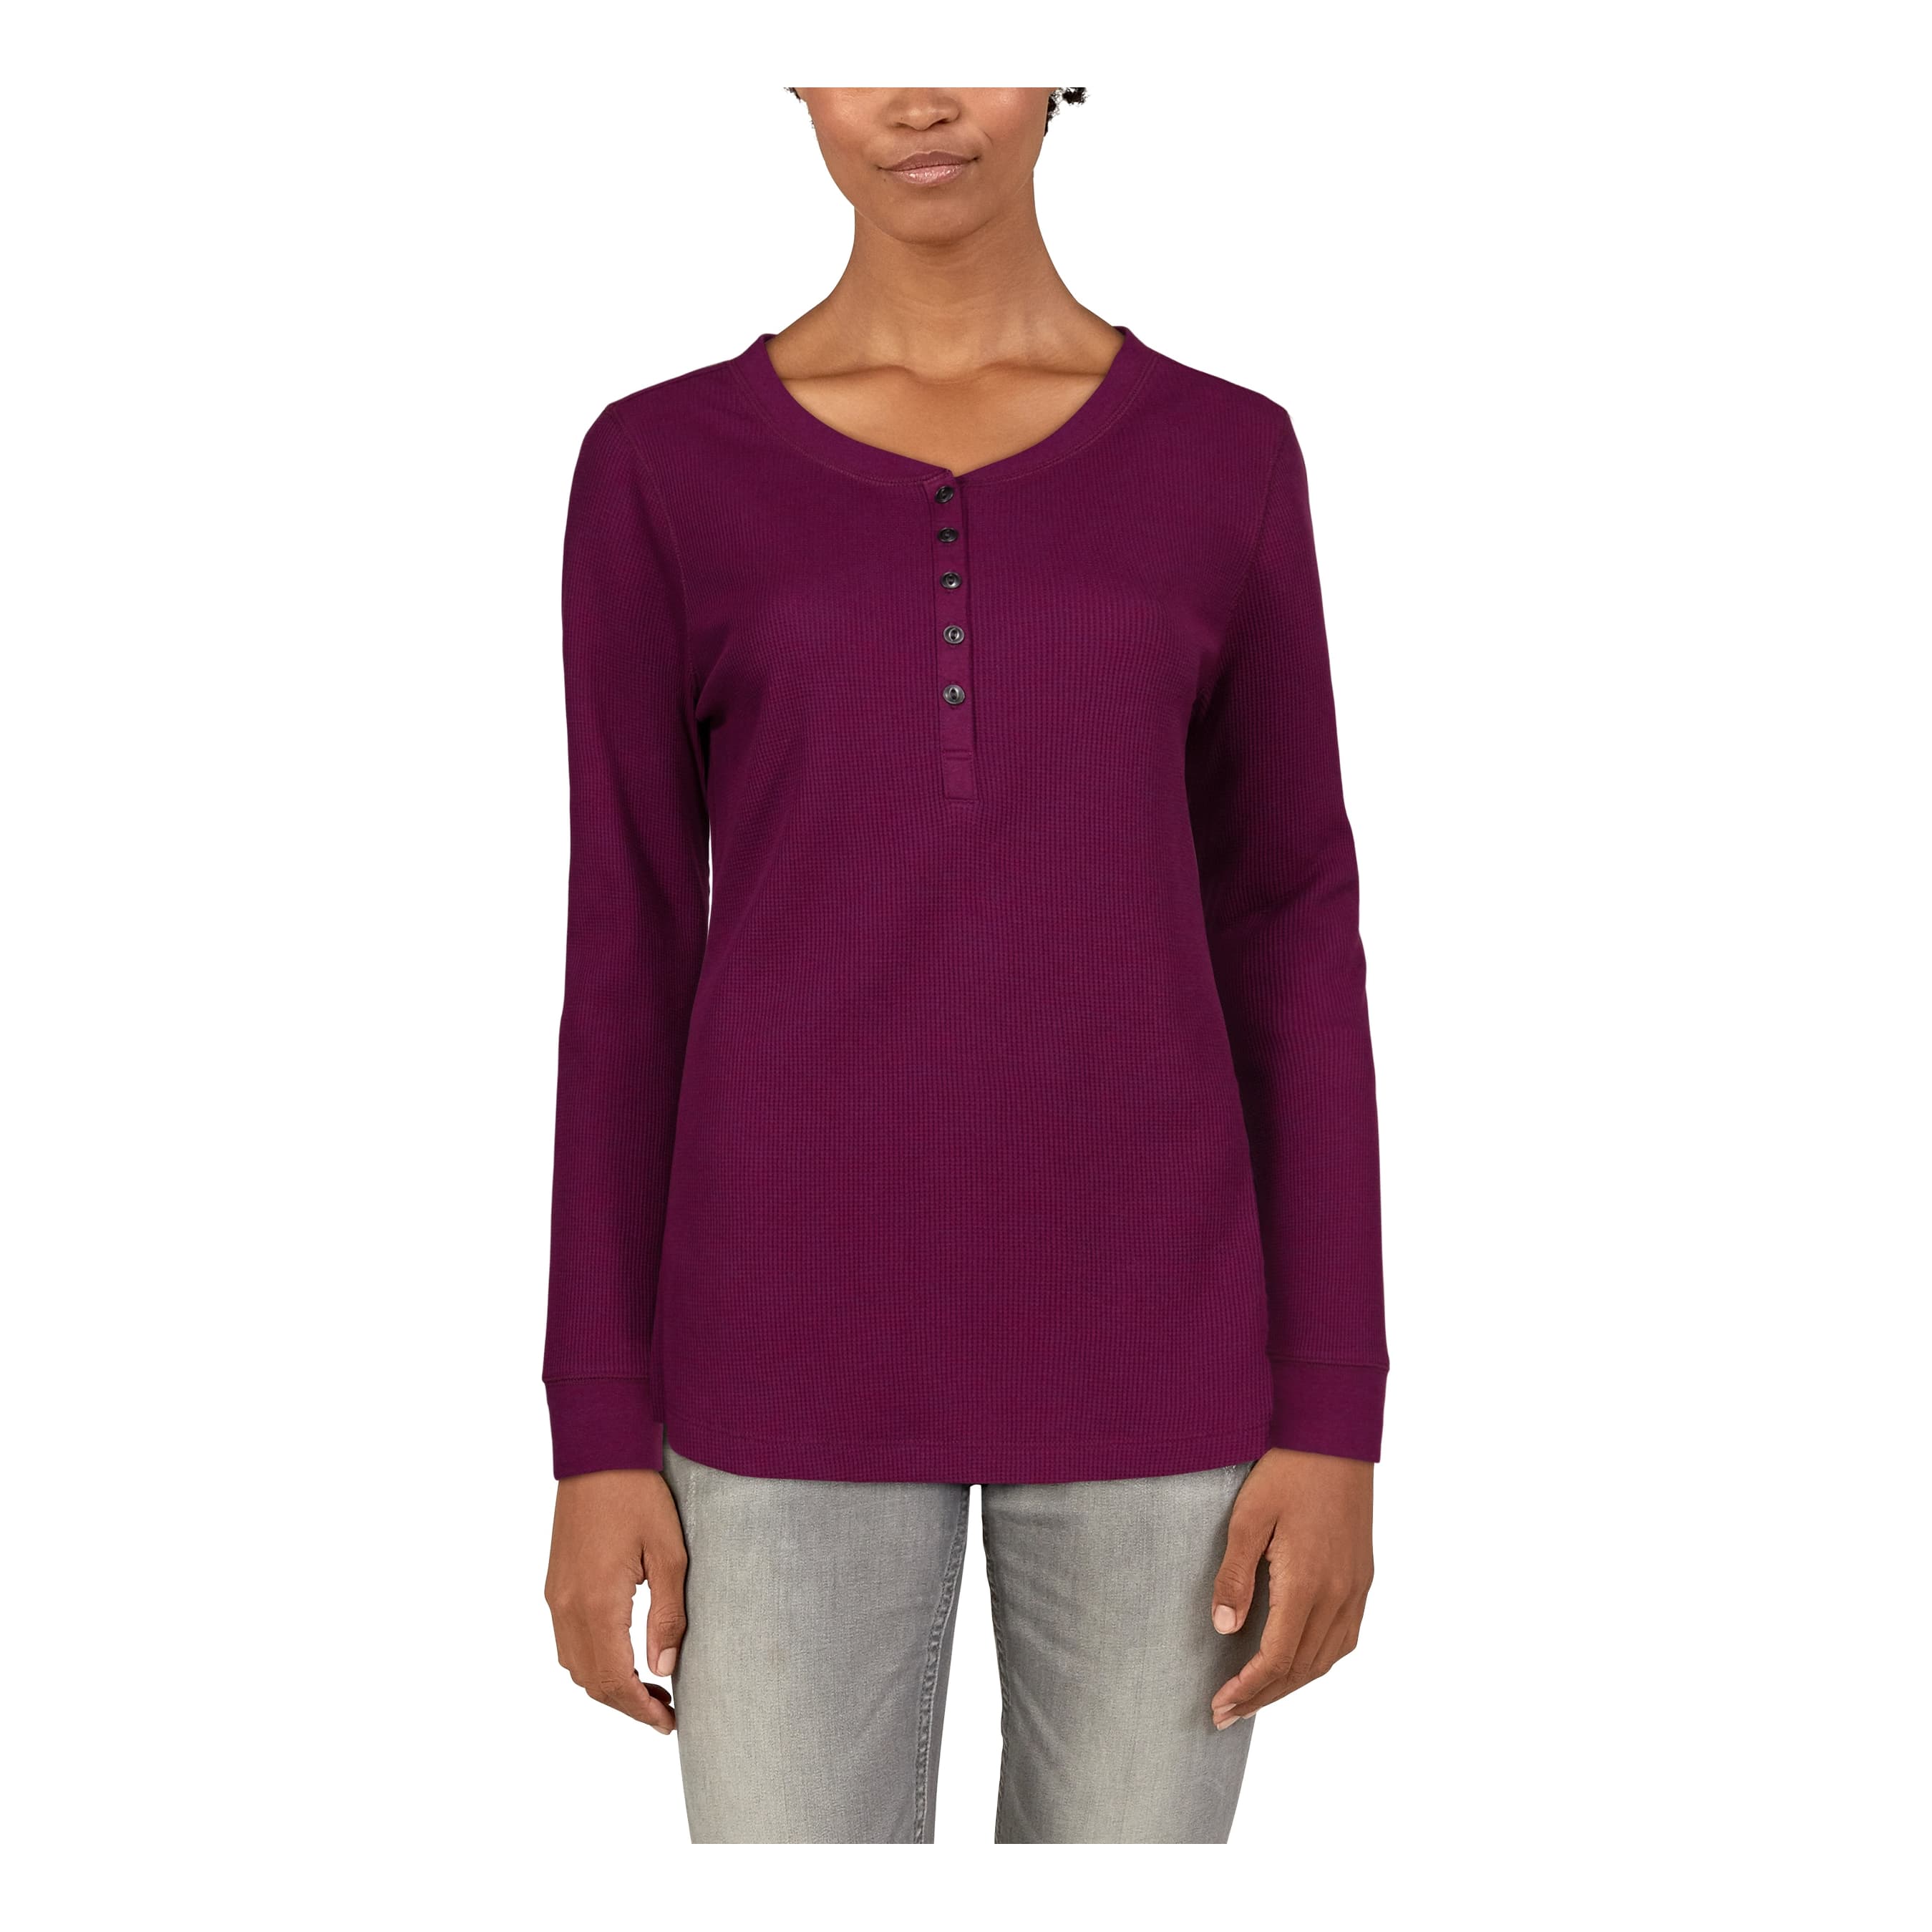 Rojo Womens Park Life Funnel Neck Thermal Top 